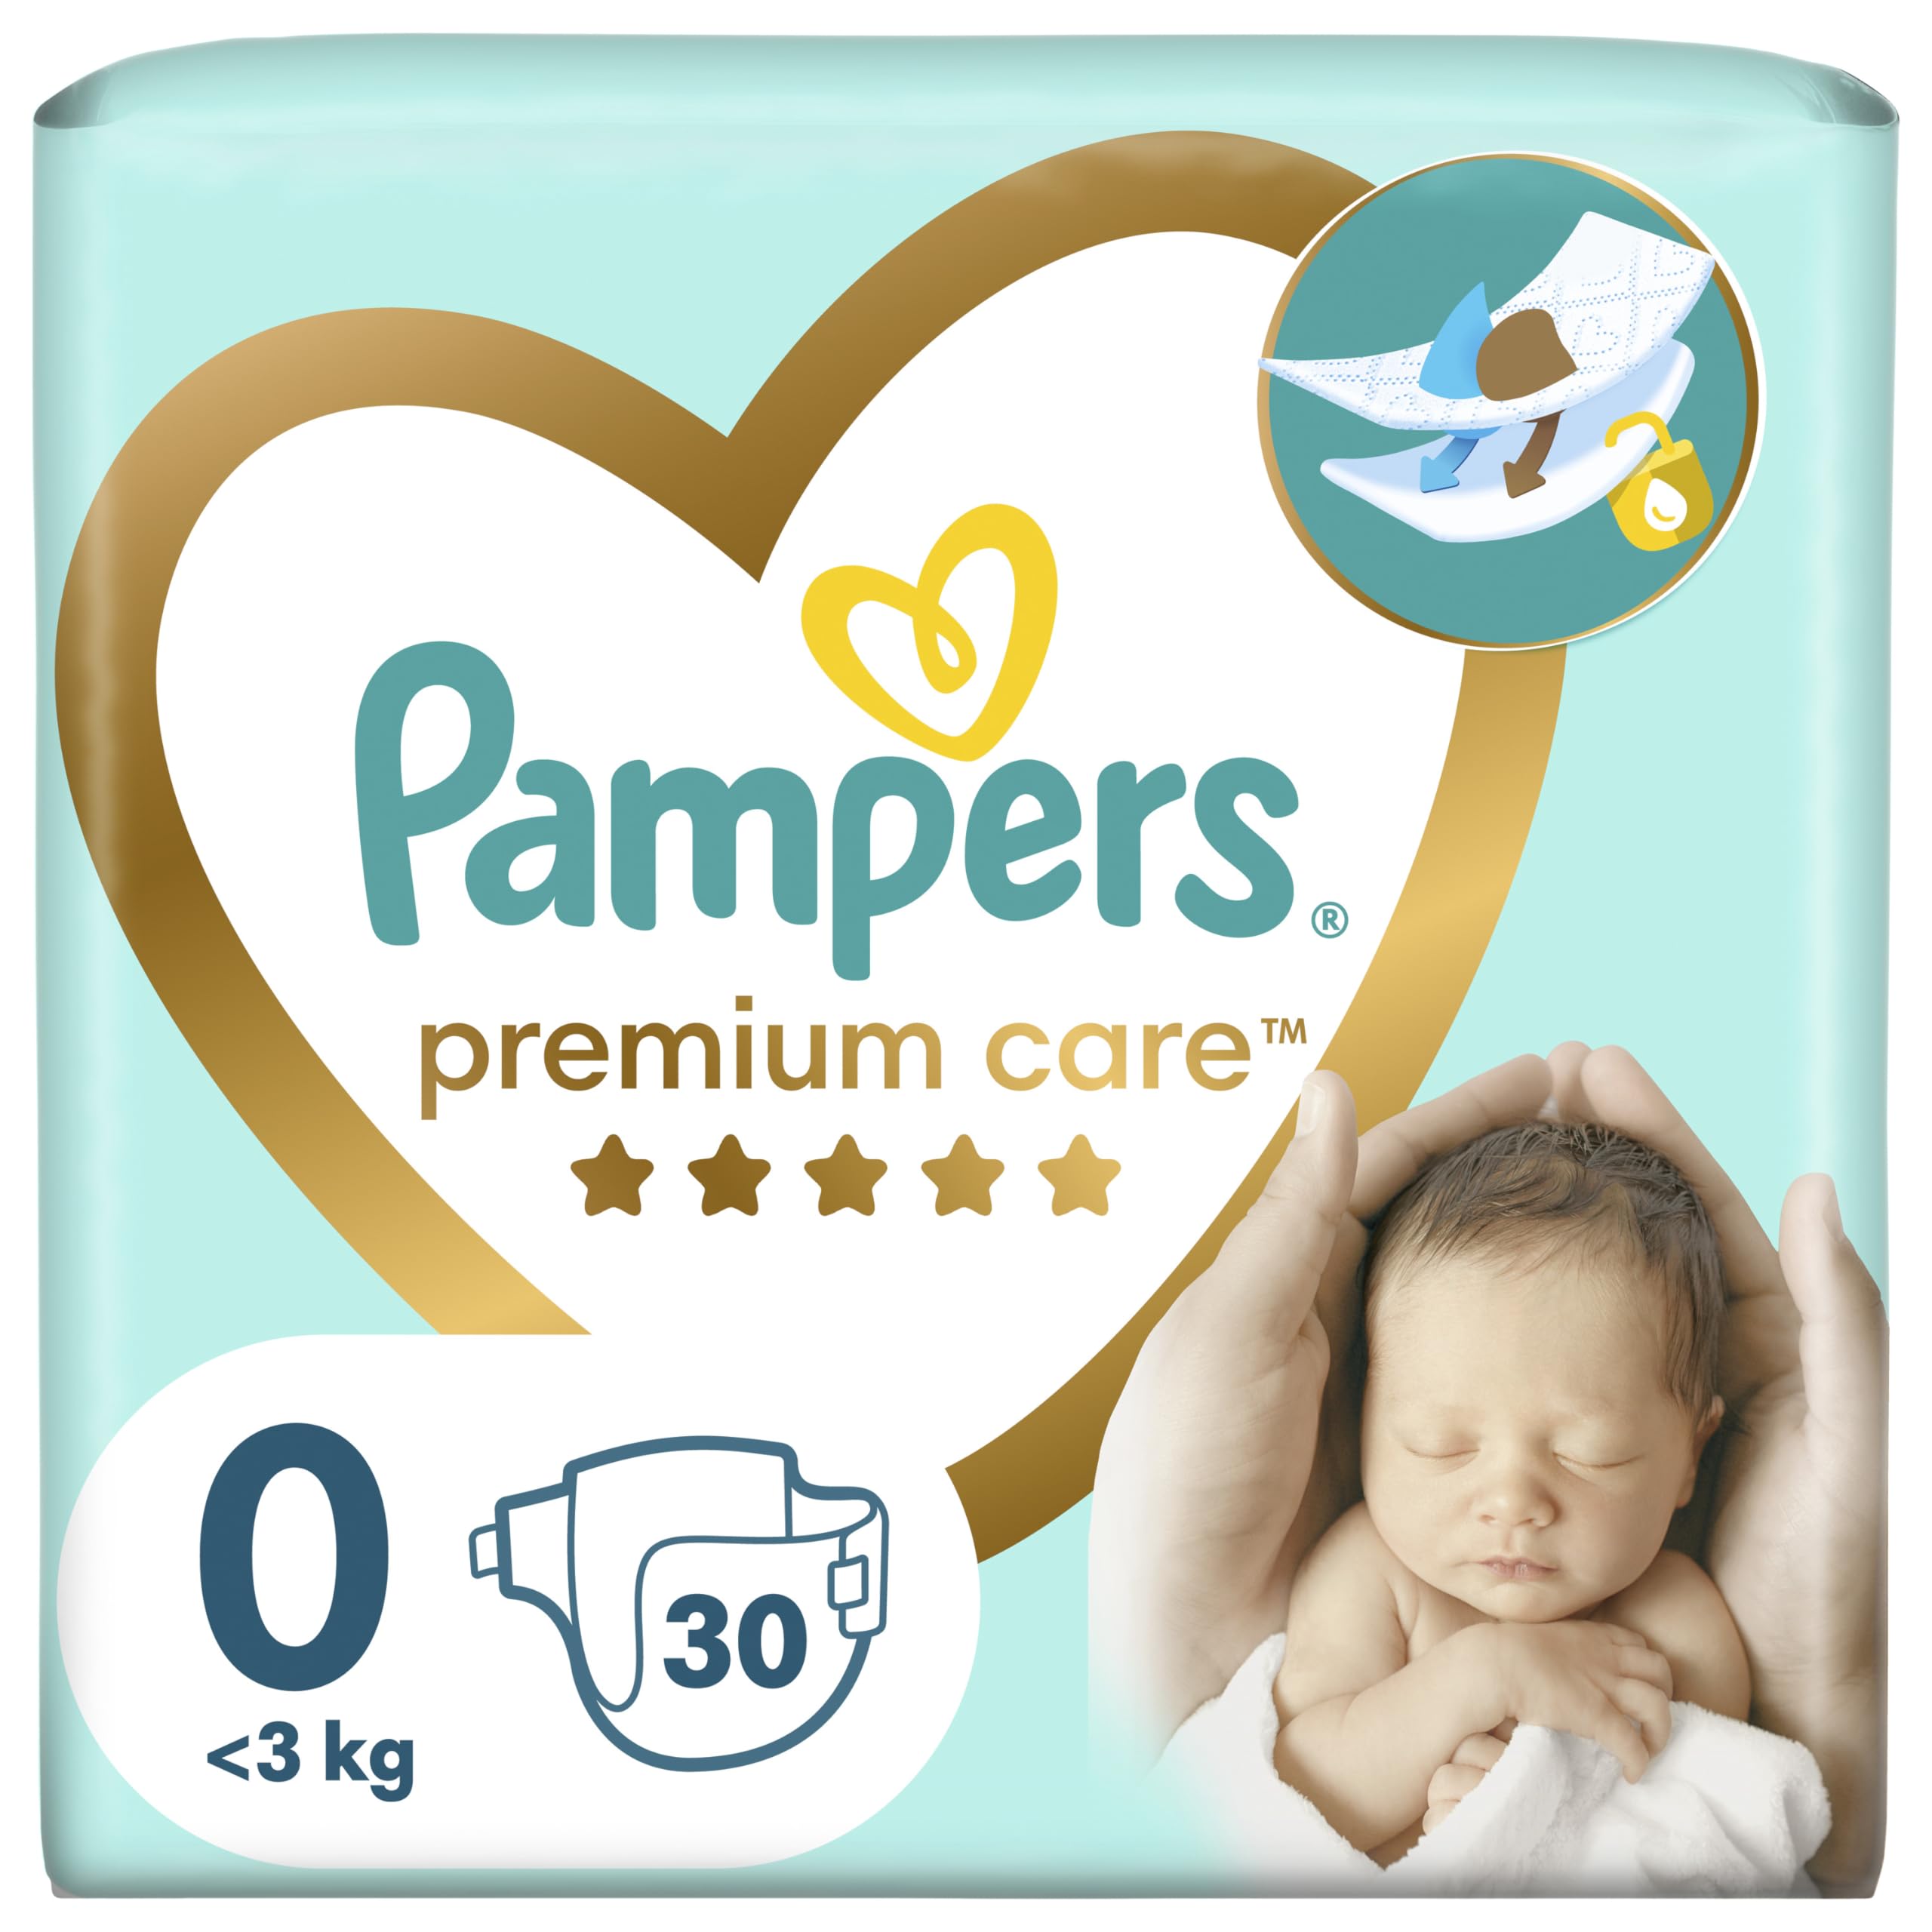 duo pack pampers